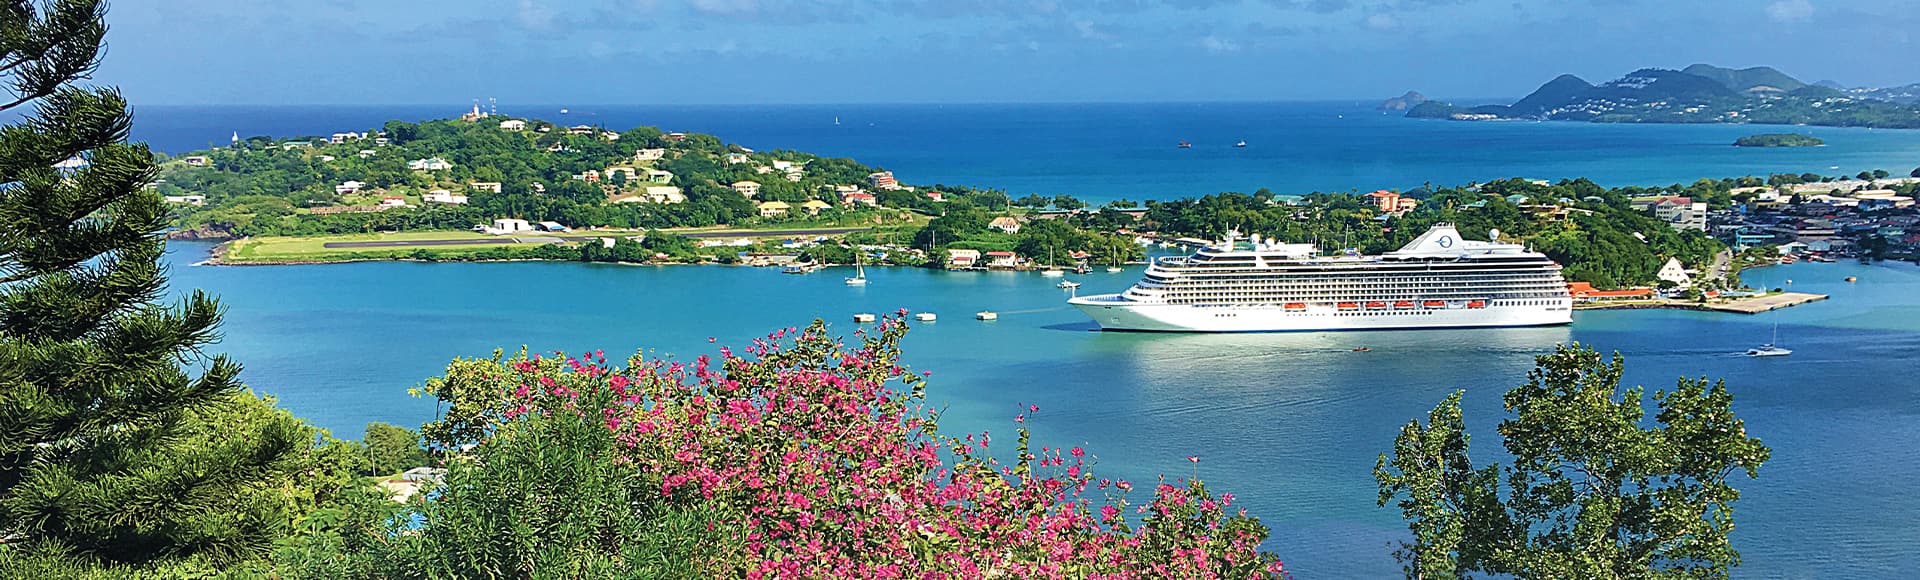 Top 7 Reasons to Cruise the Caribbean with Oceania Cruises